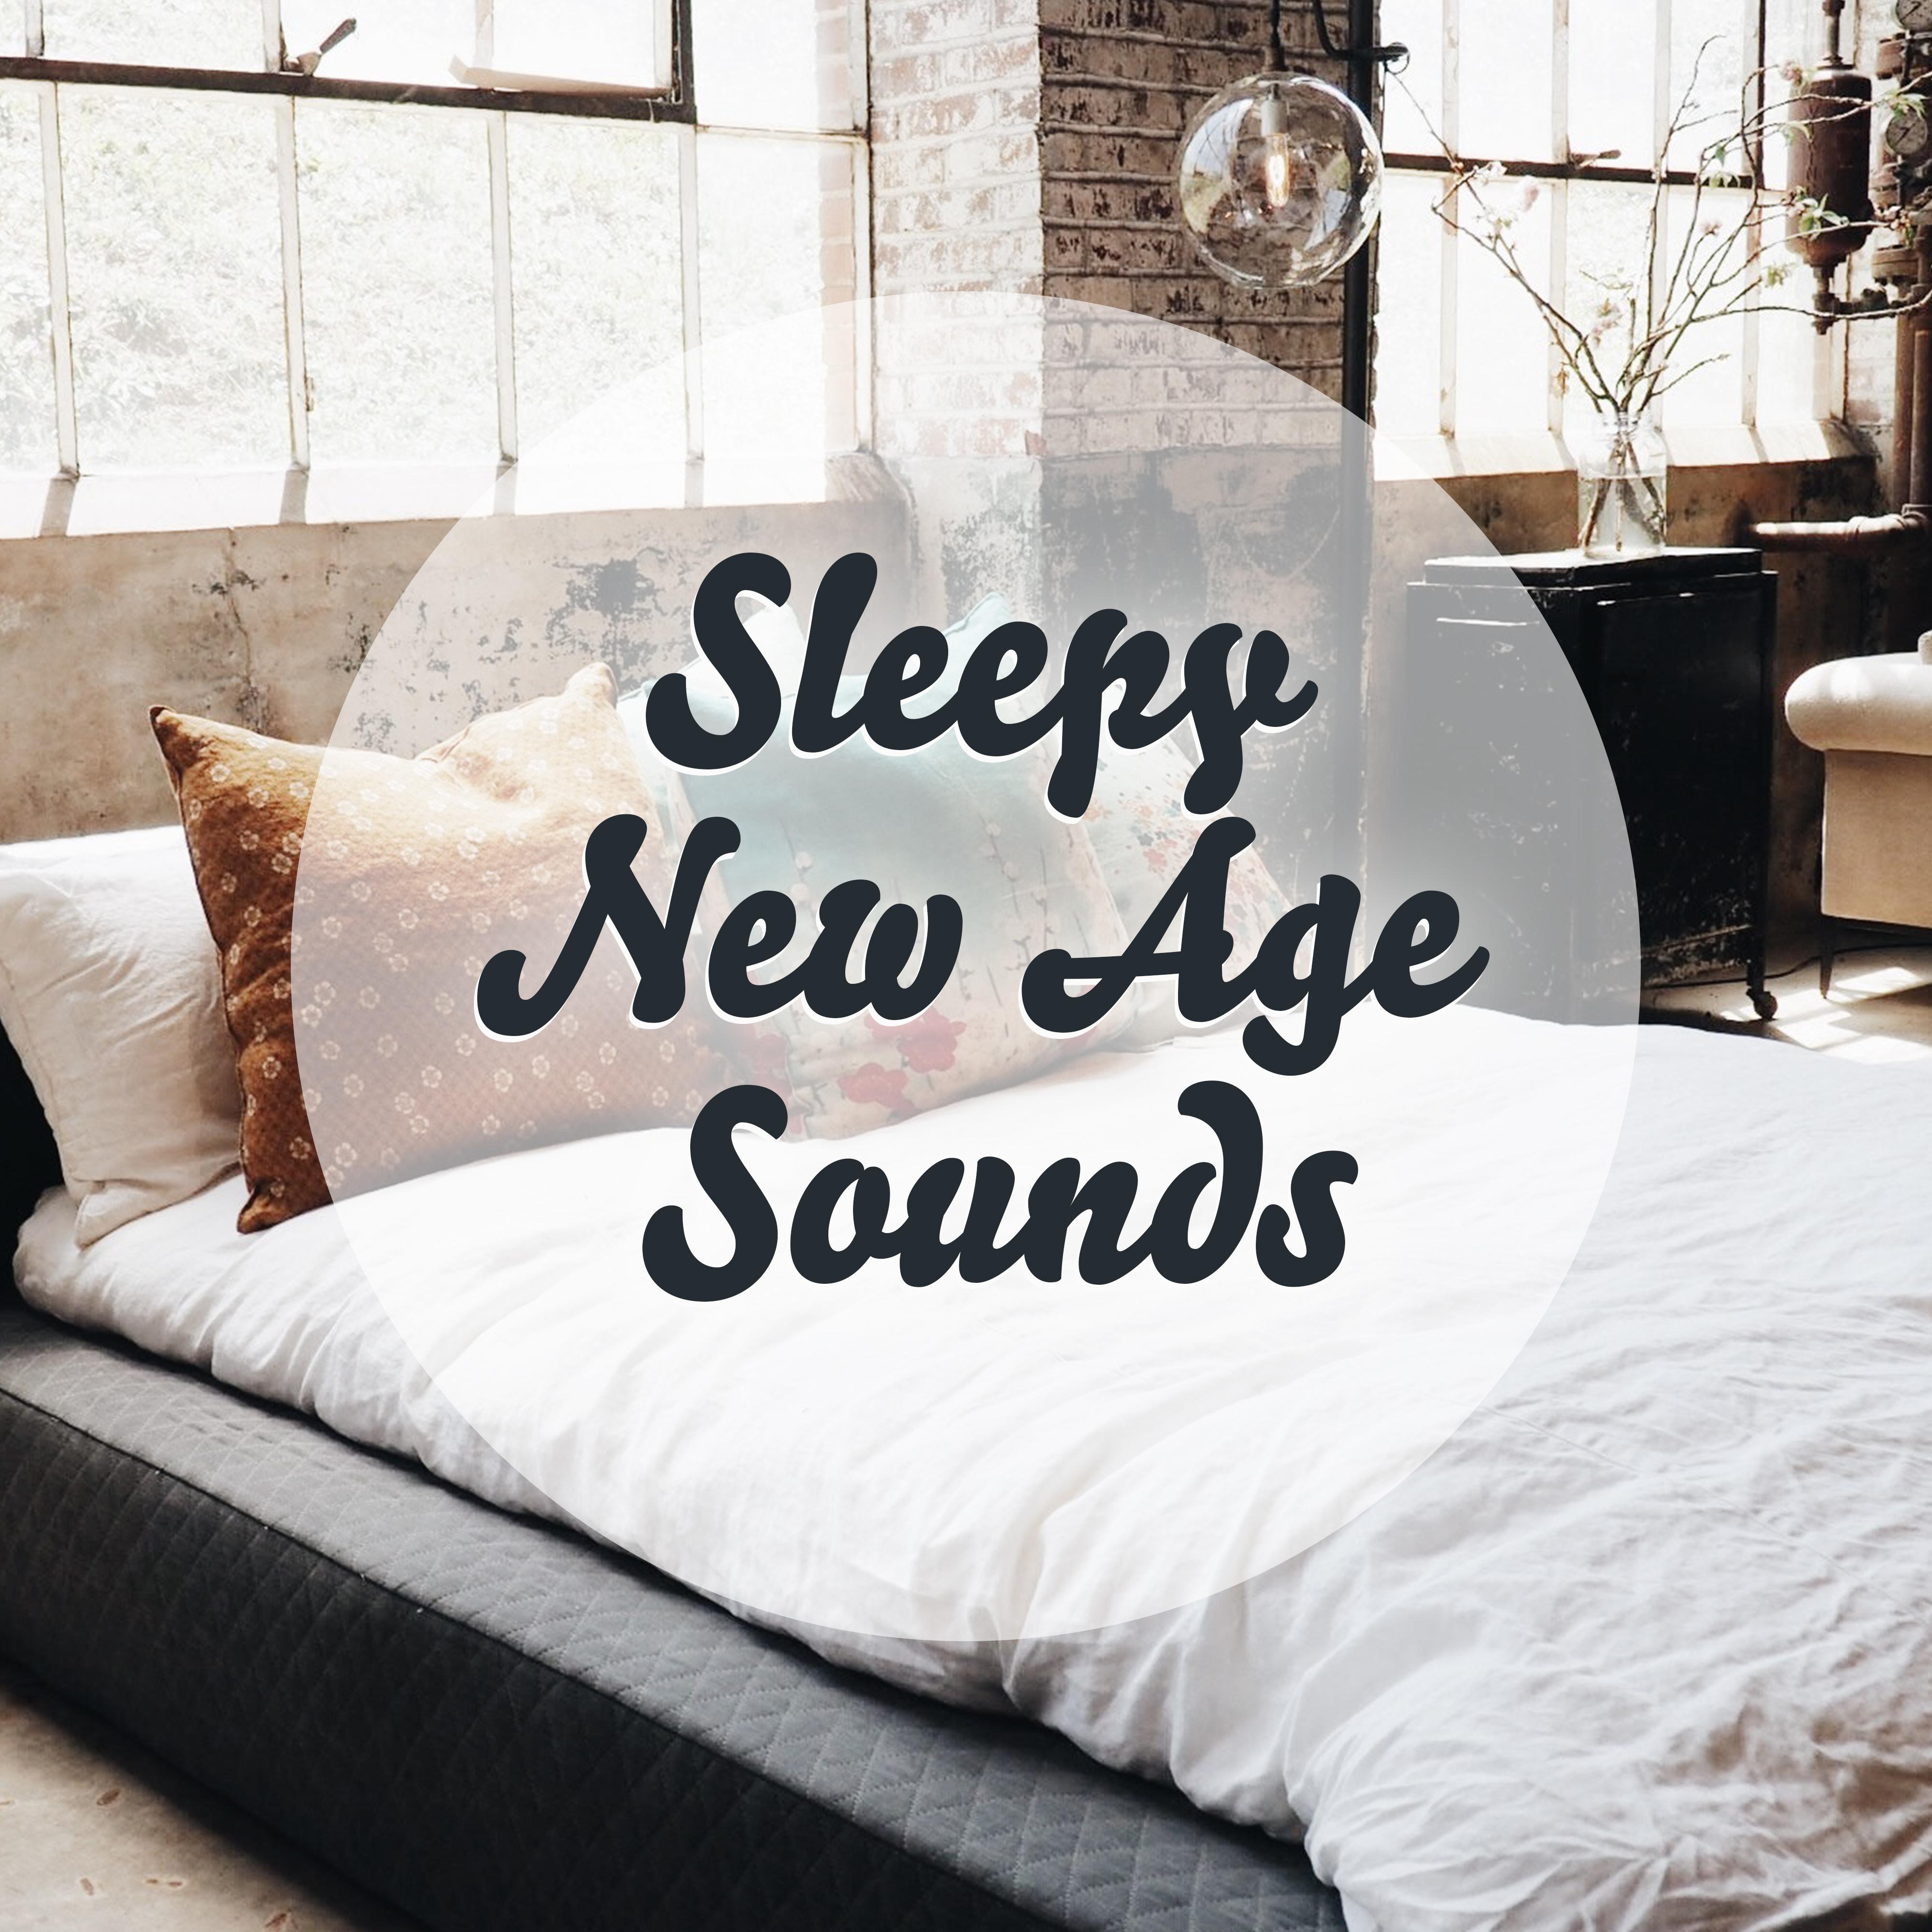 Sleepy New Age Sounds  to Sleep, As a Help in Insomnia, to Quickly and Easily Fall Asleep